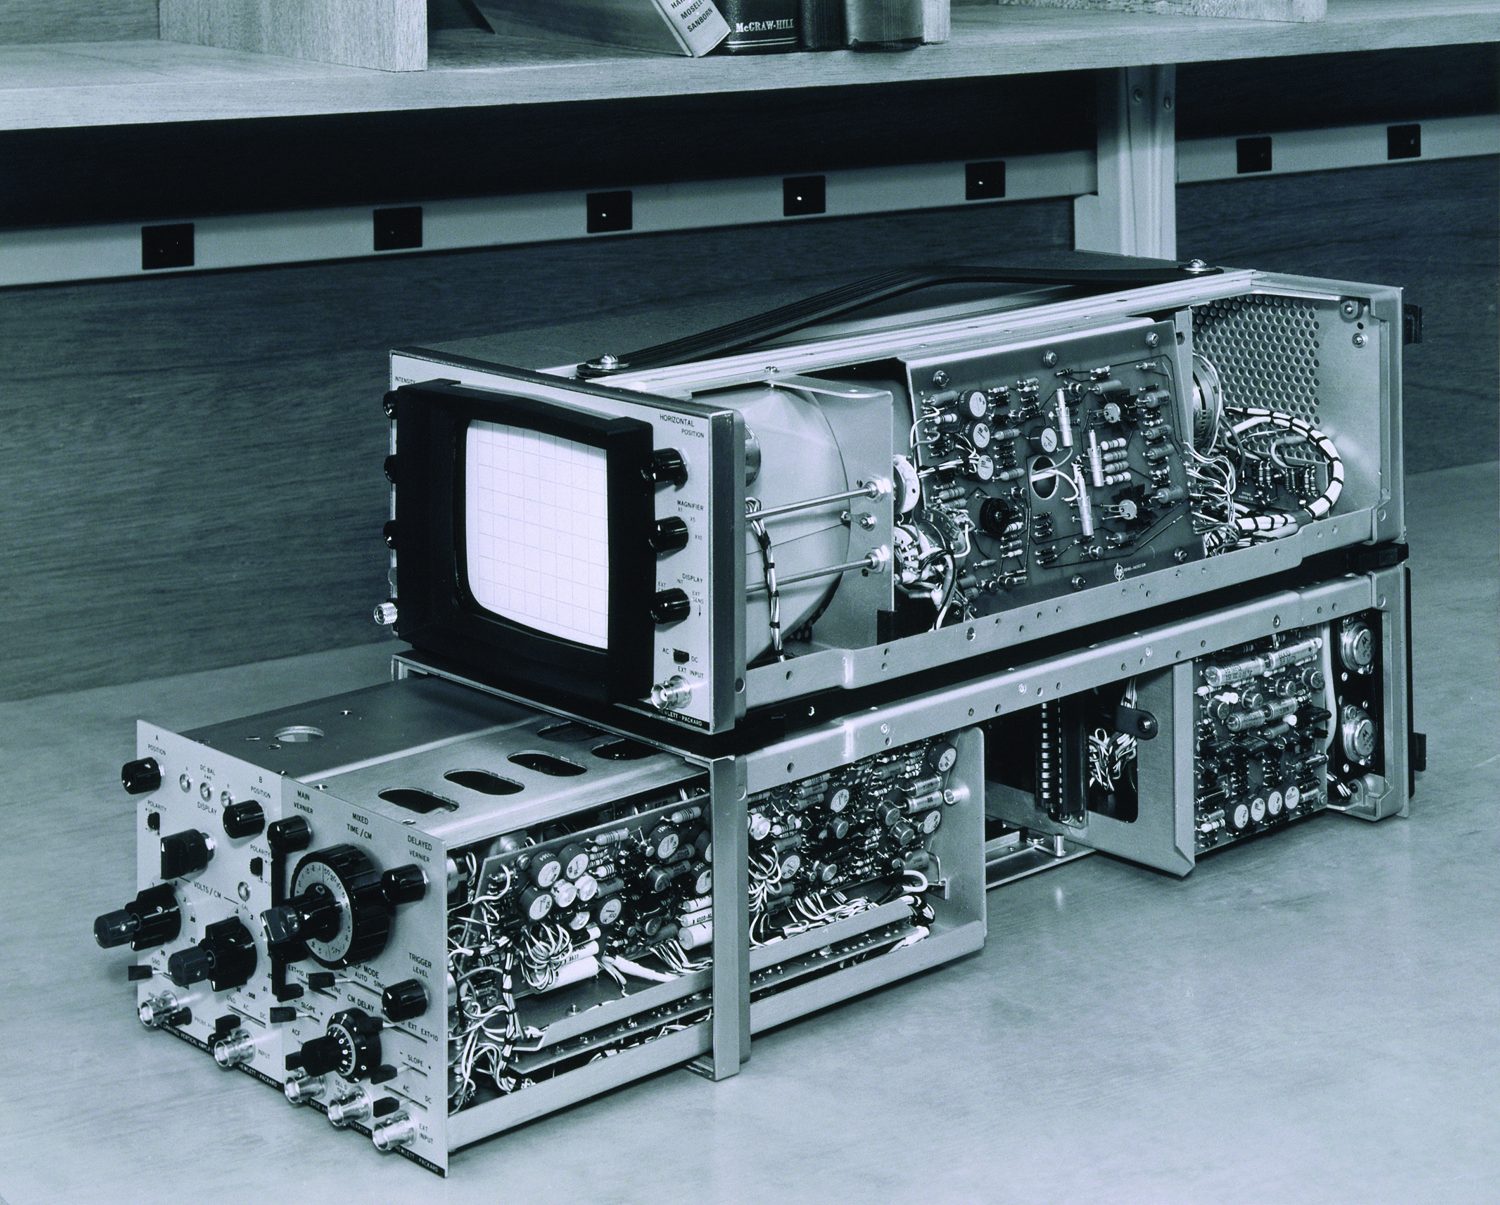 A photo of the HP 180A oscilloscope taken in 1962.